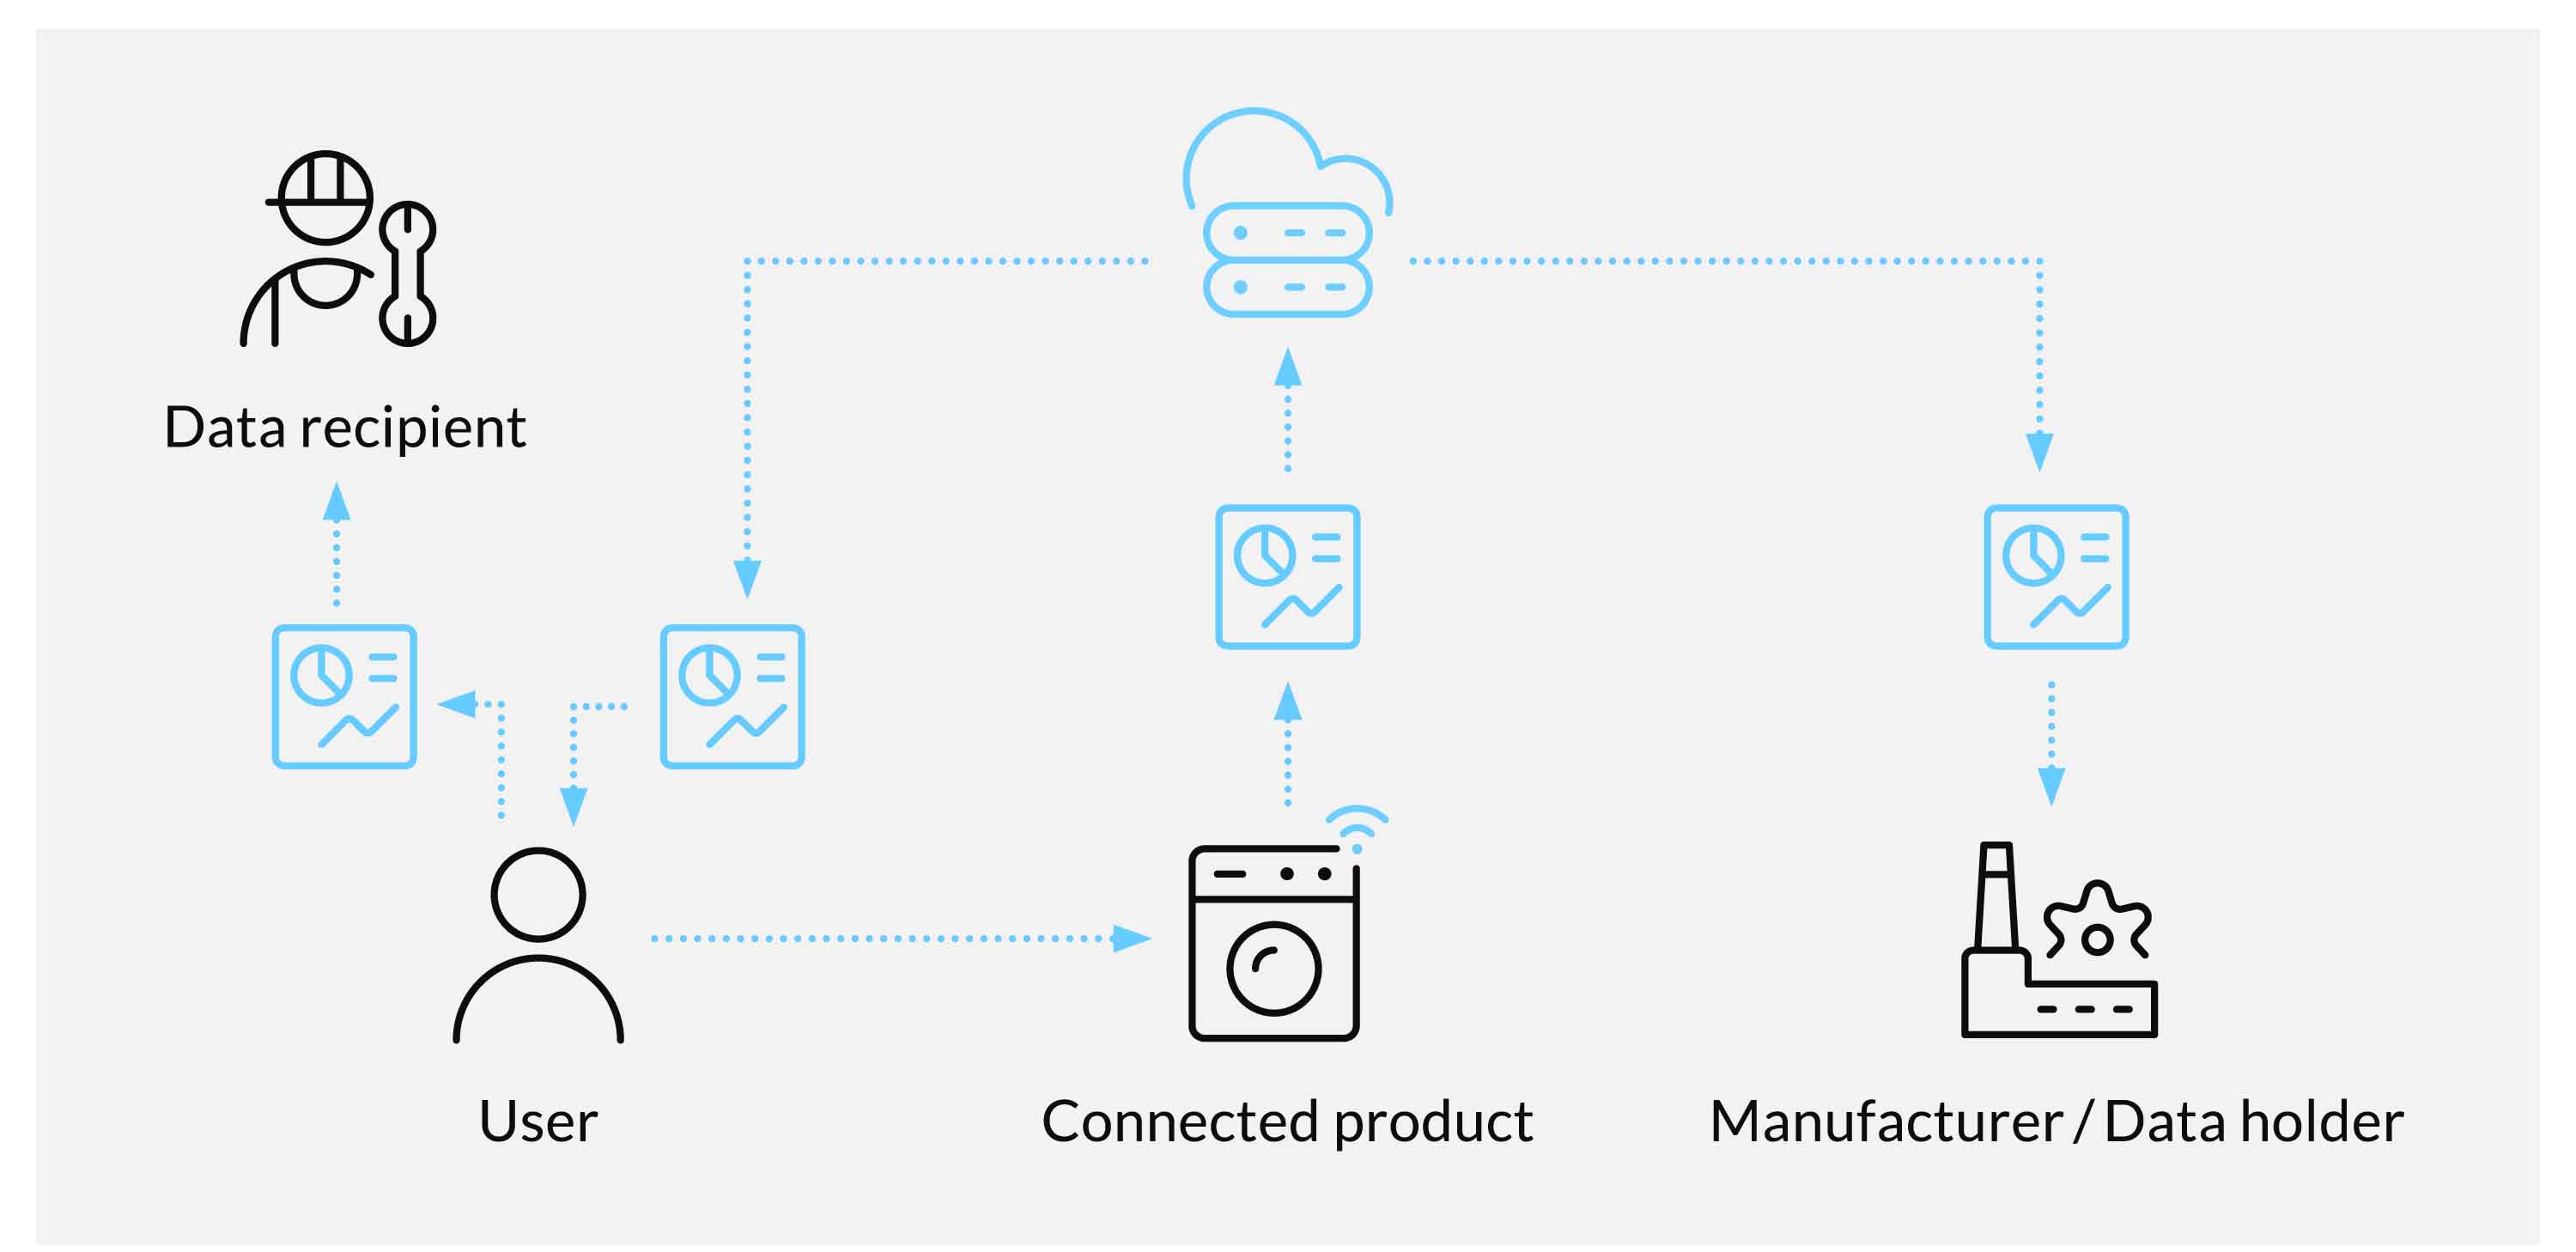 Graphic: service provider and user on the left hand-side. User ist connected with connected product, which is connected with the cloud and the manufacturer/data holder